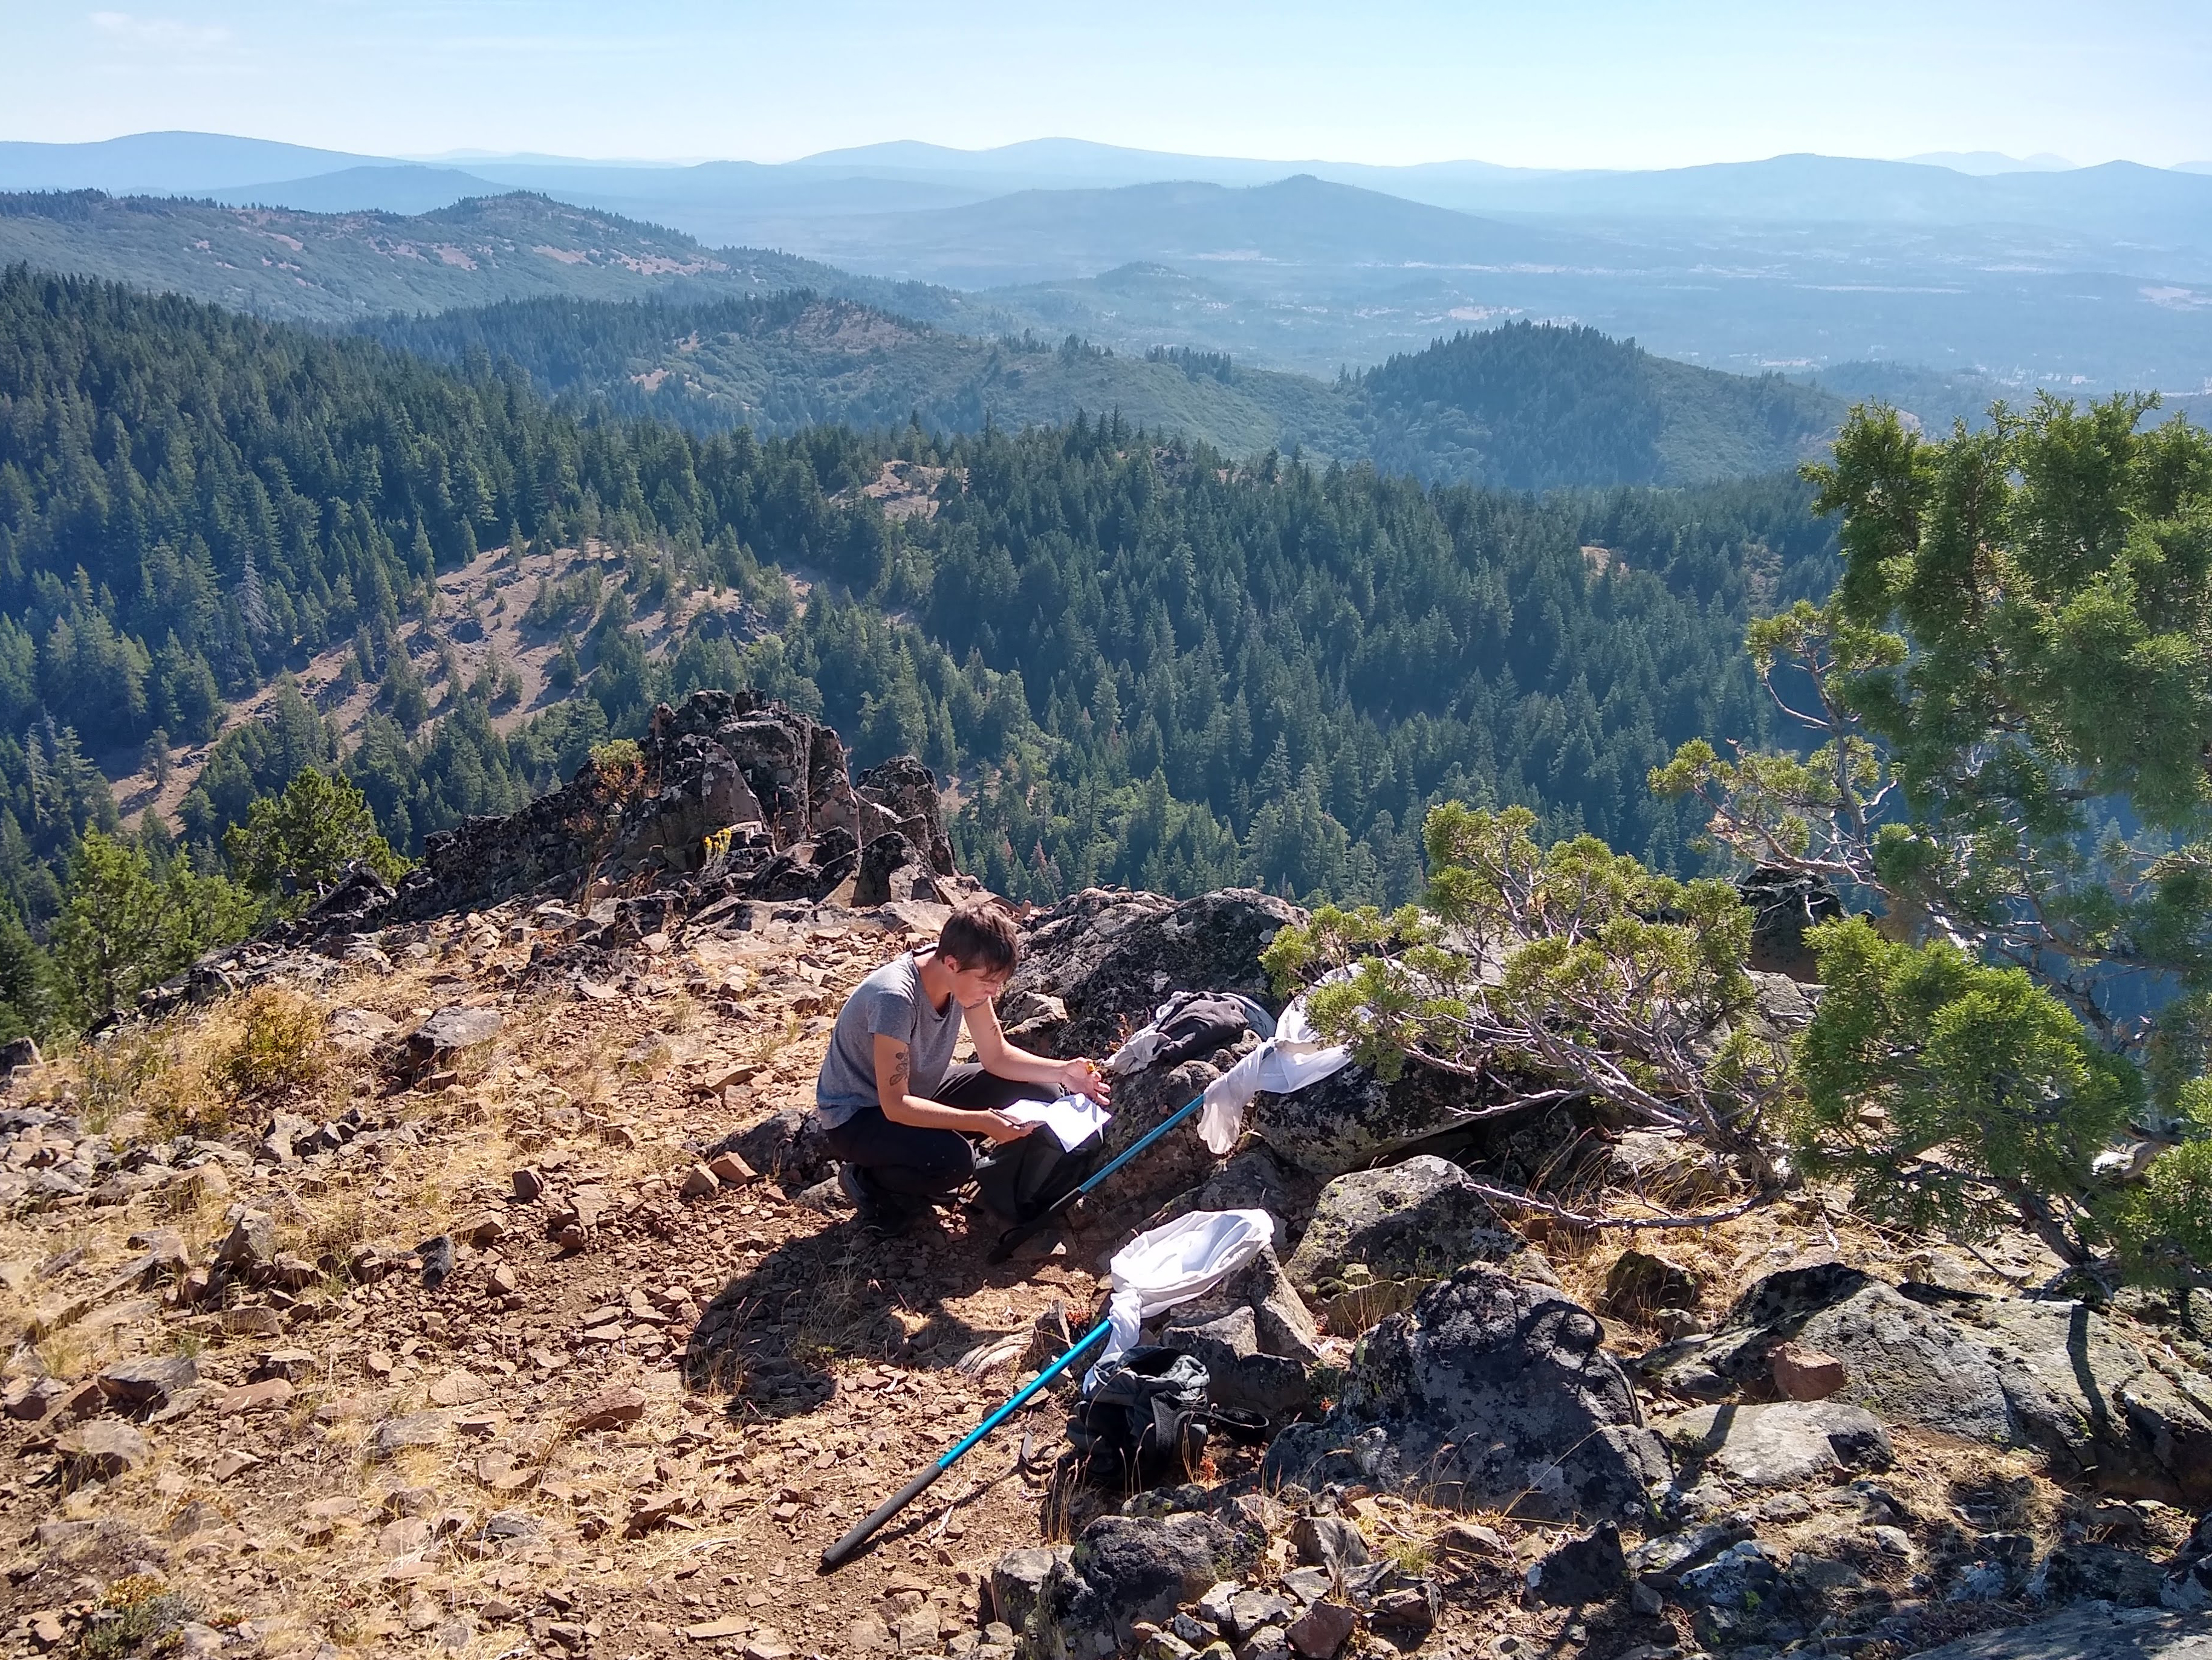 A woman crouches to record data on a piece of paper, near her butterfly net. She is atop a rock-strewn hill amid a mountainous landscape.